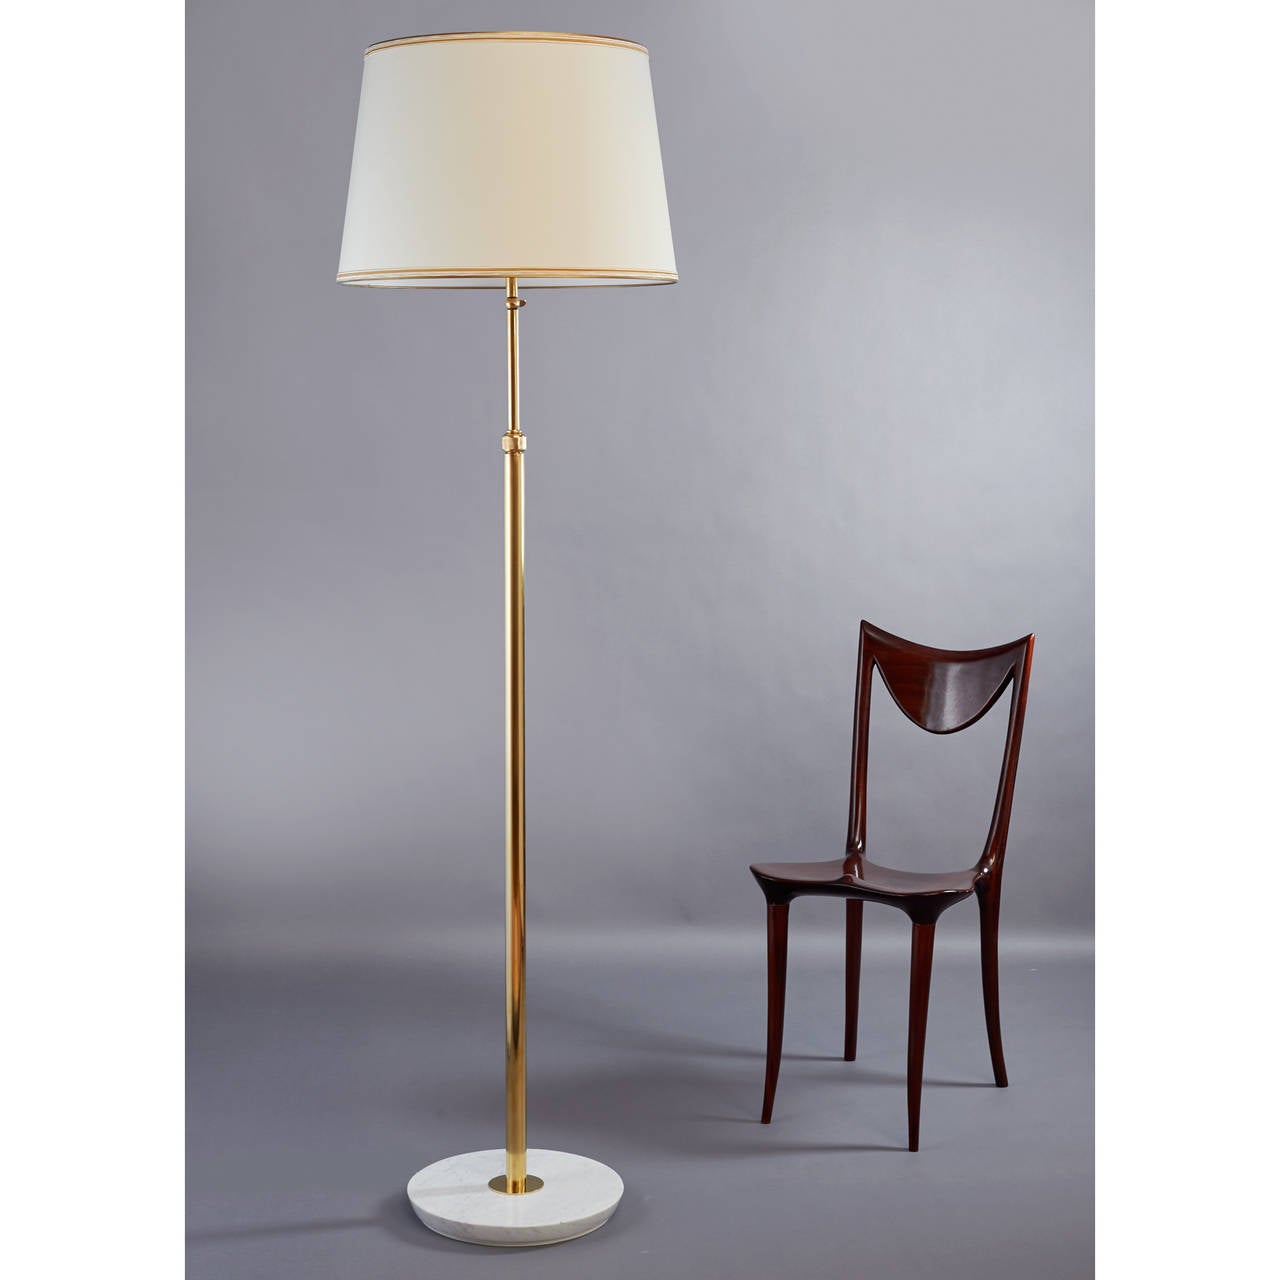 Polished Transformable Floor Lamp by Oluce, Italy 1940s